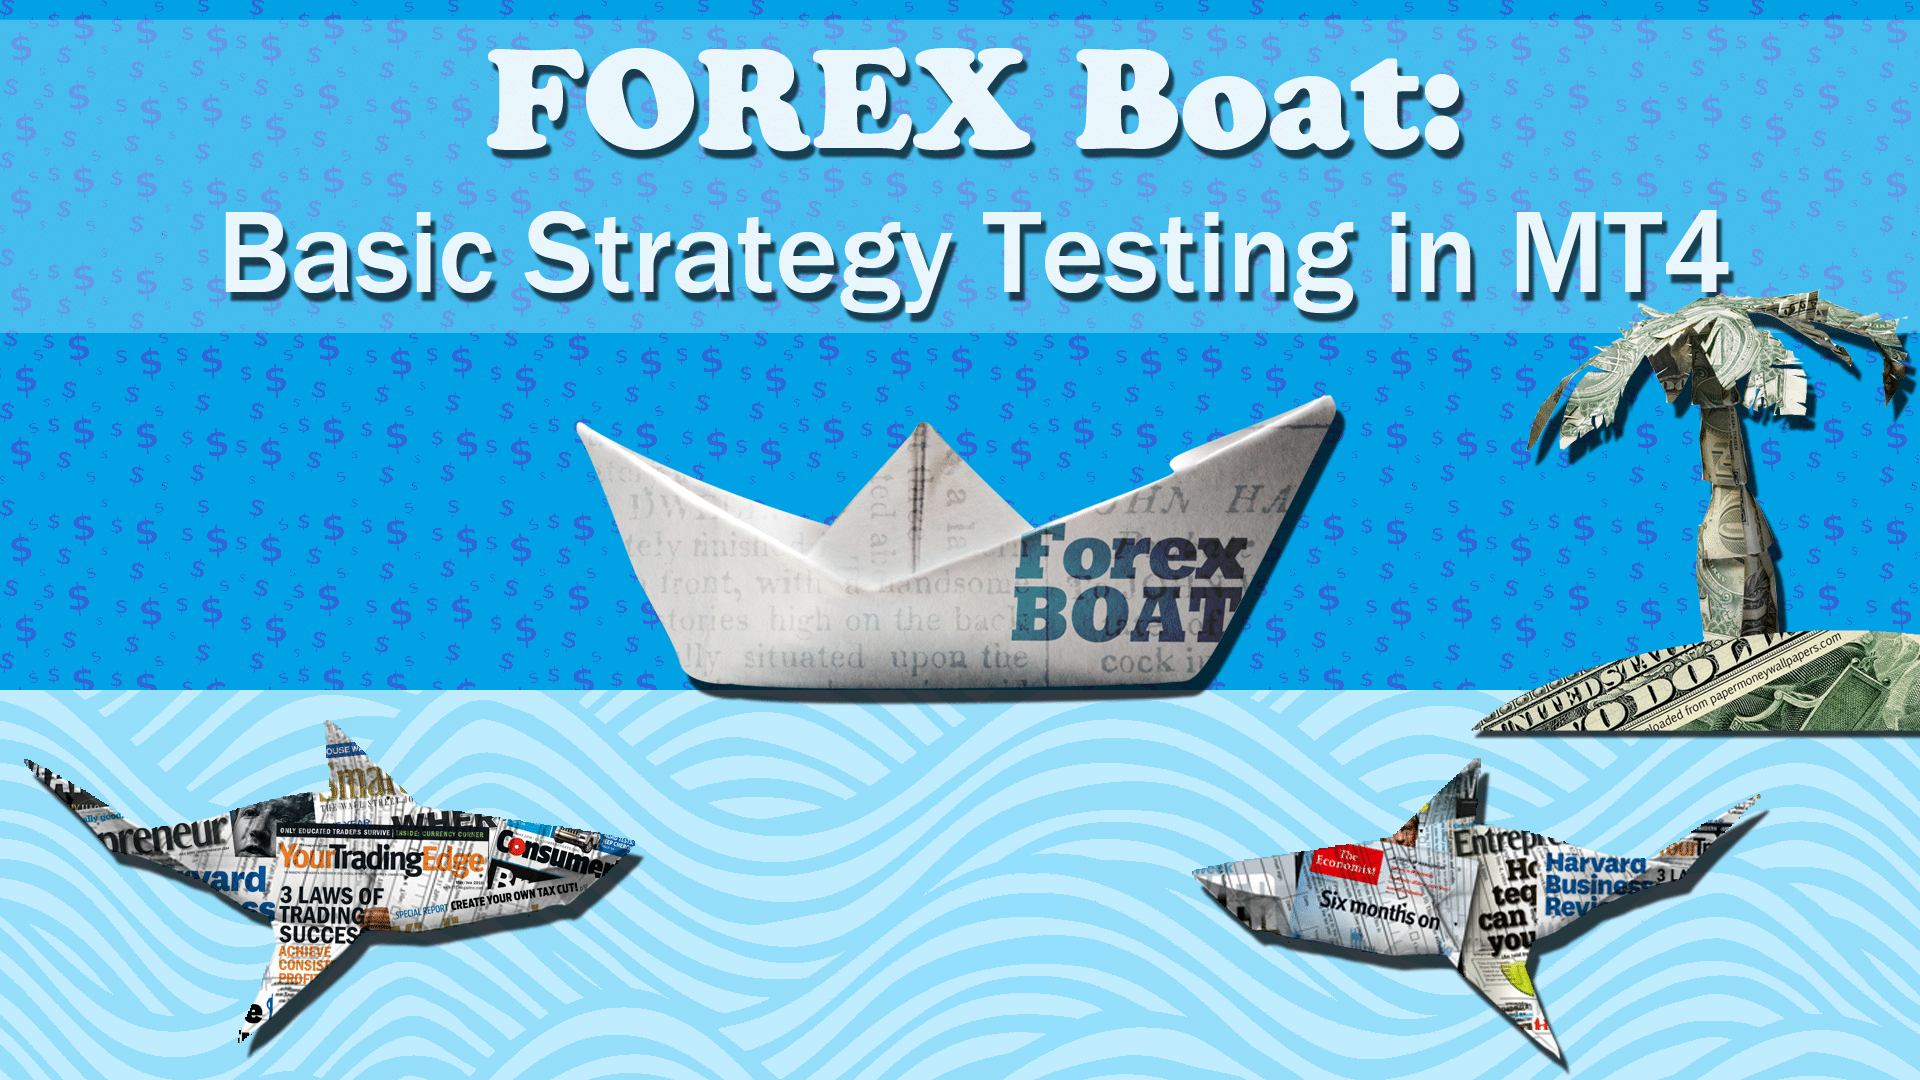 Forex boat